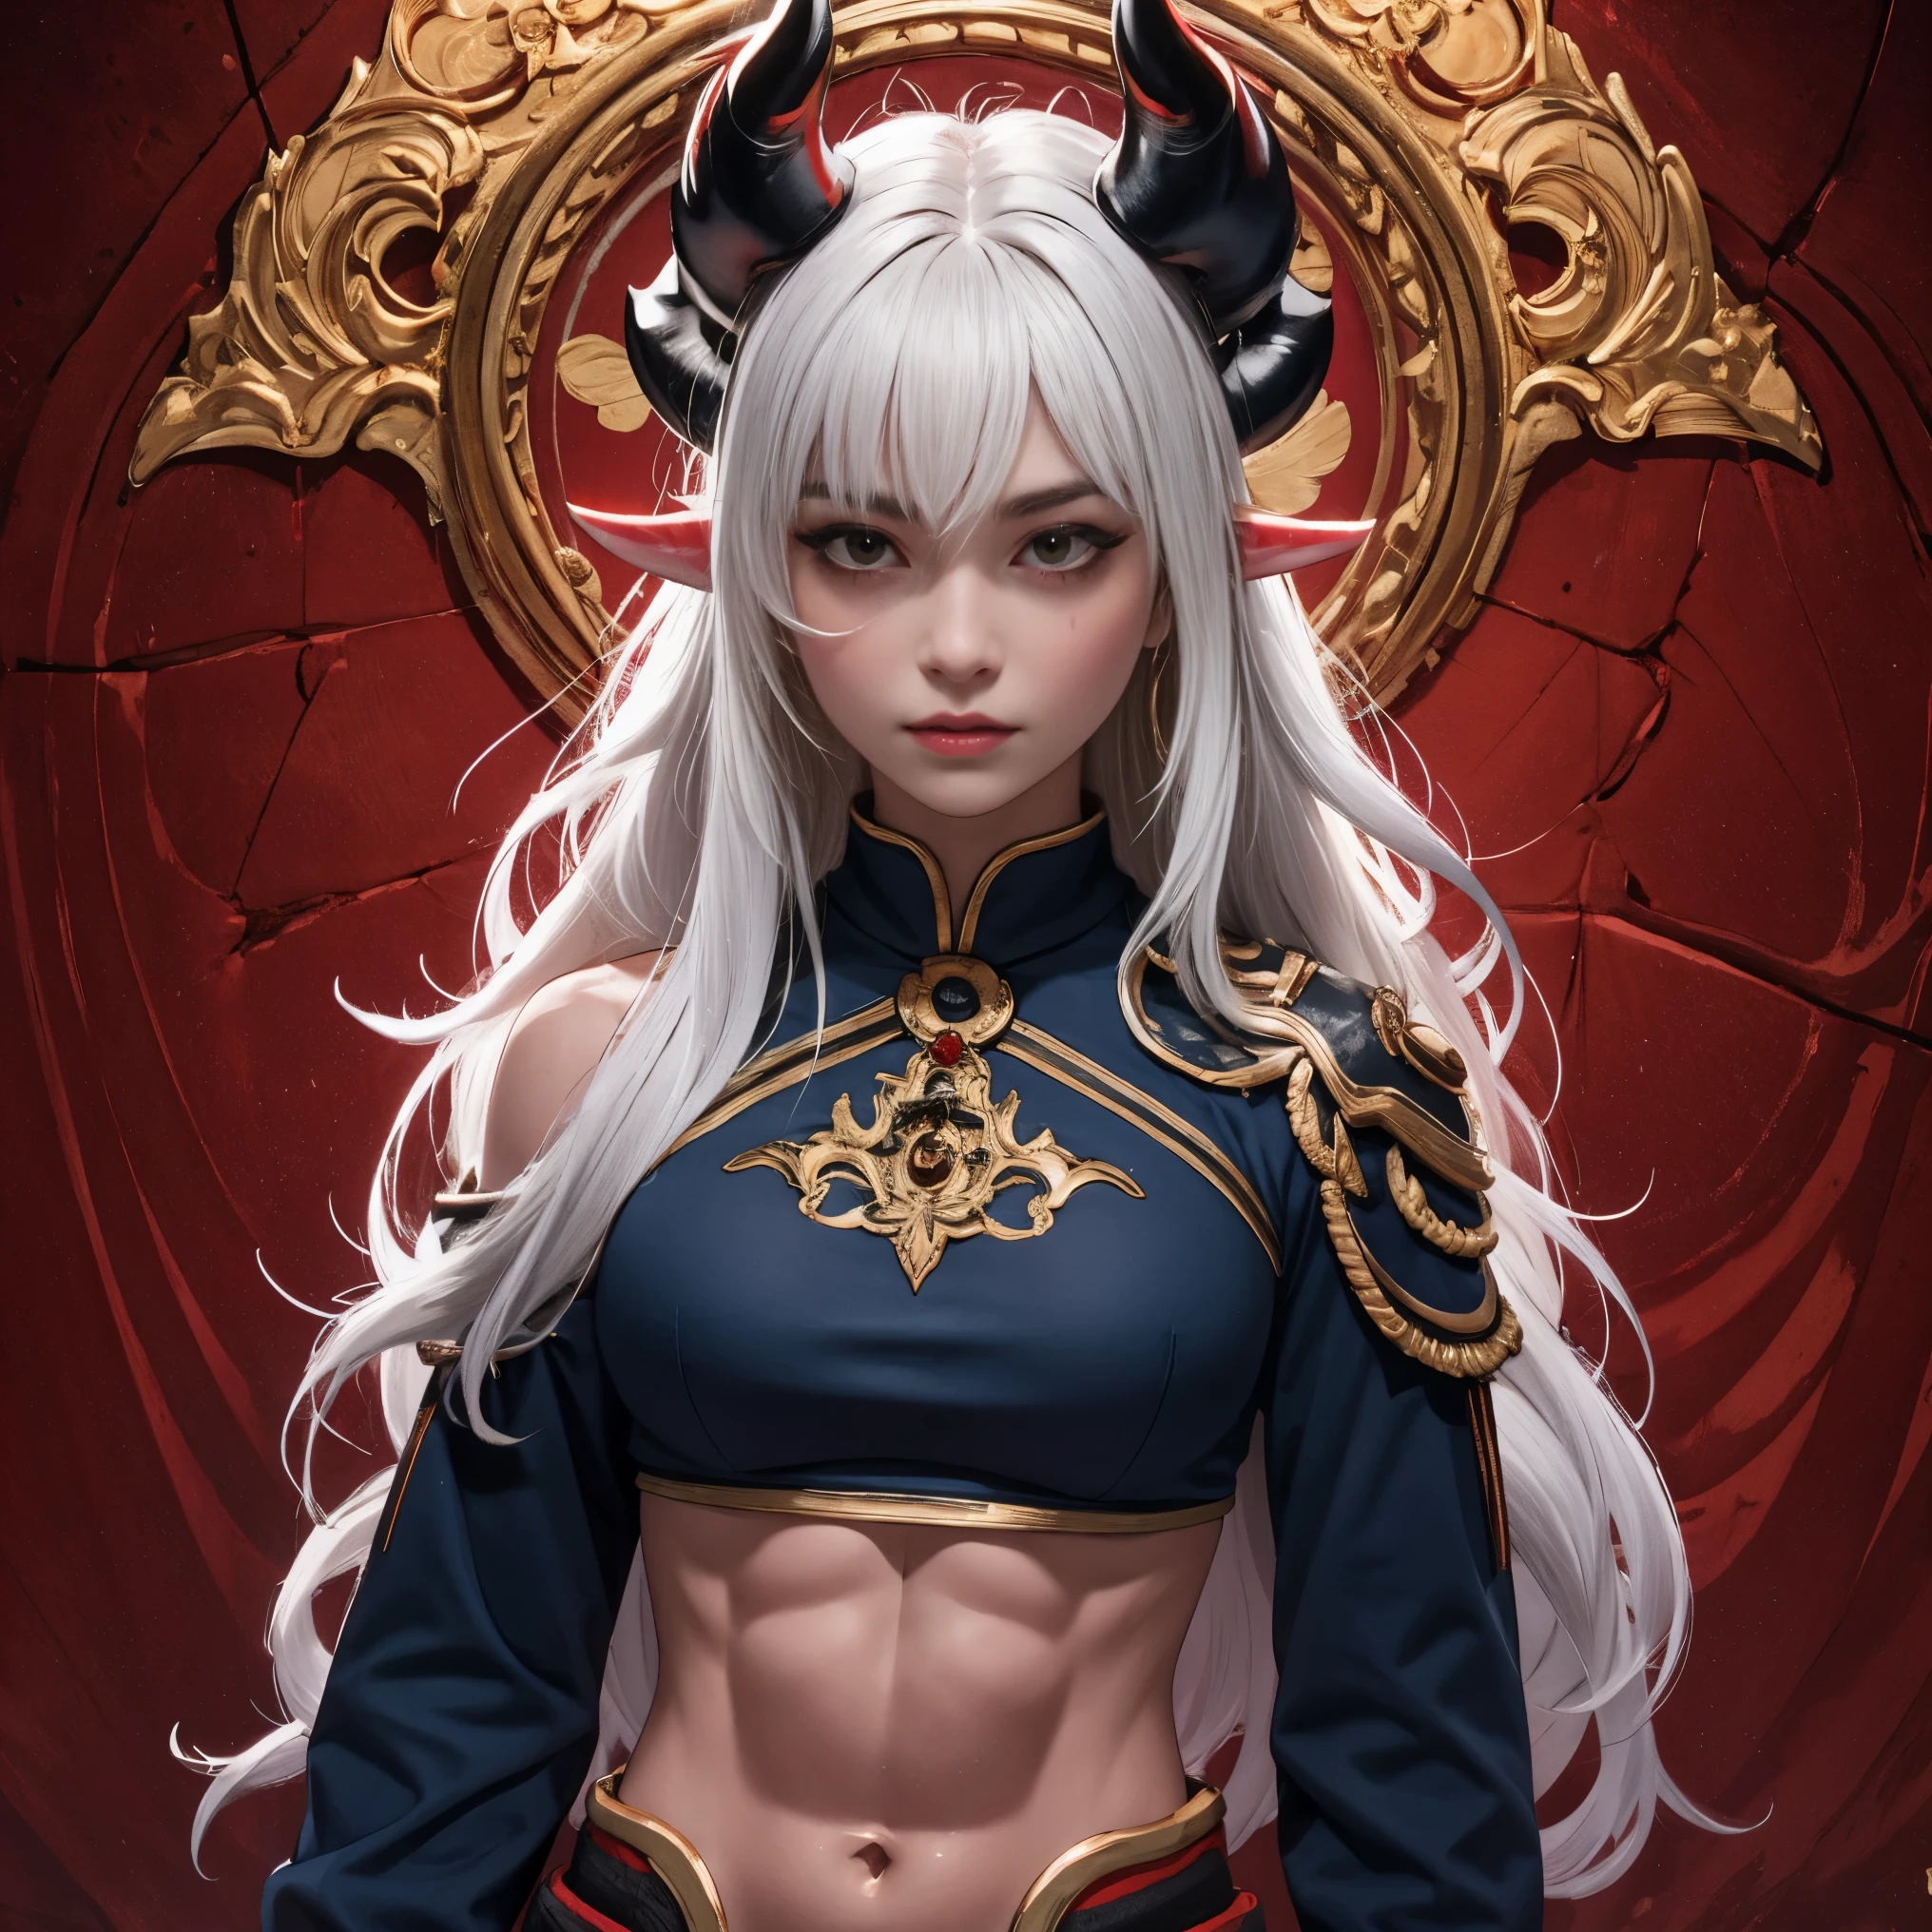 masterpiece, 8k resolution, high quality, high resolution, best quality, extremally detailed, best resolution, absurd resolution, ray tracing, high detailed, extremely detailed,detailed face, shoulder length white hair, female oni,two red horns on her head, muscular body, dark blue skin, scars, six pack abs, exposed midriff, tall, solo female